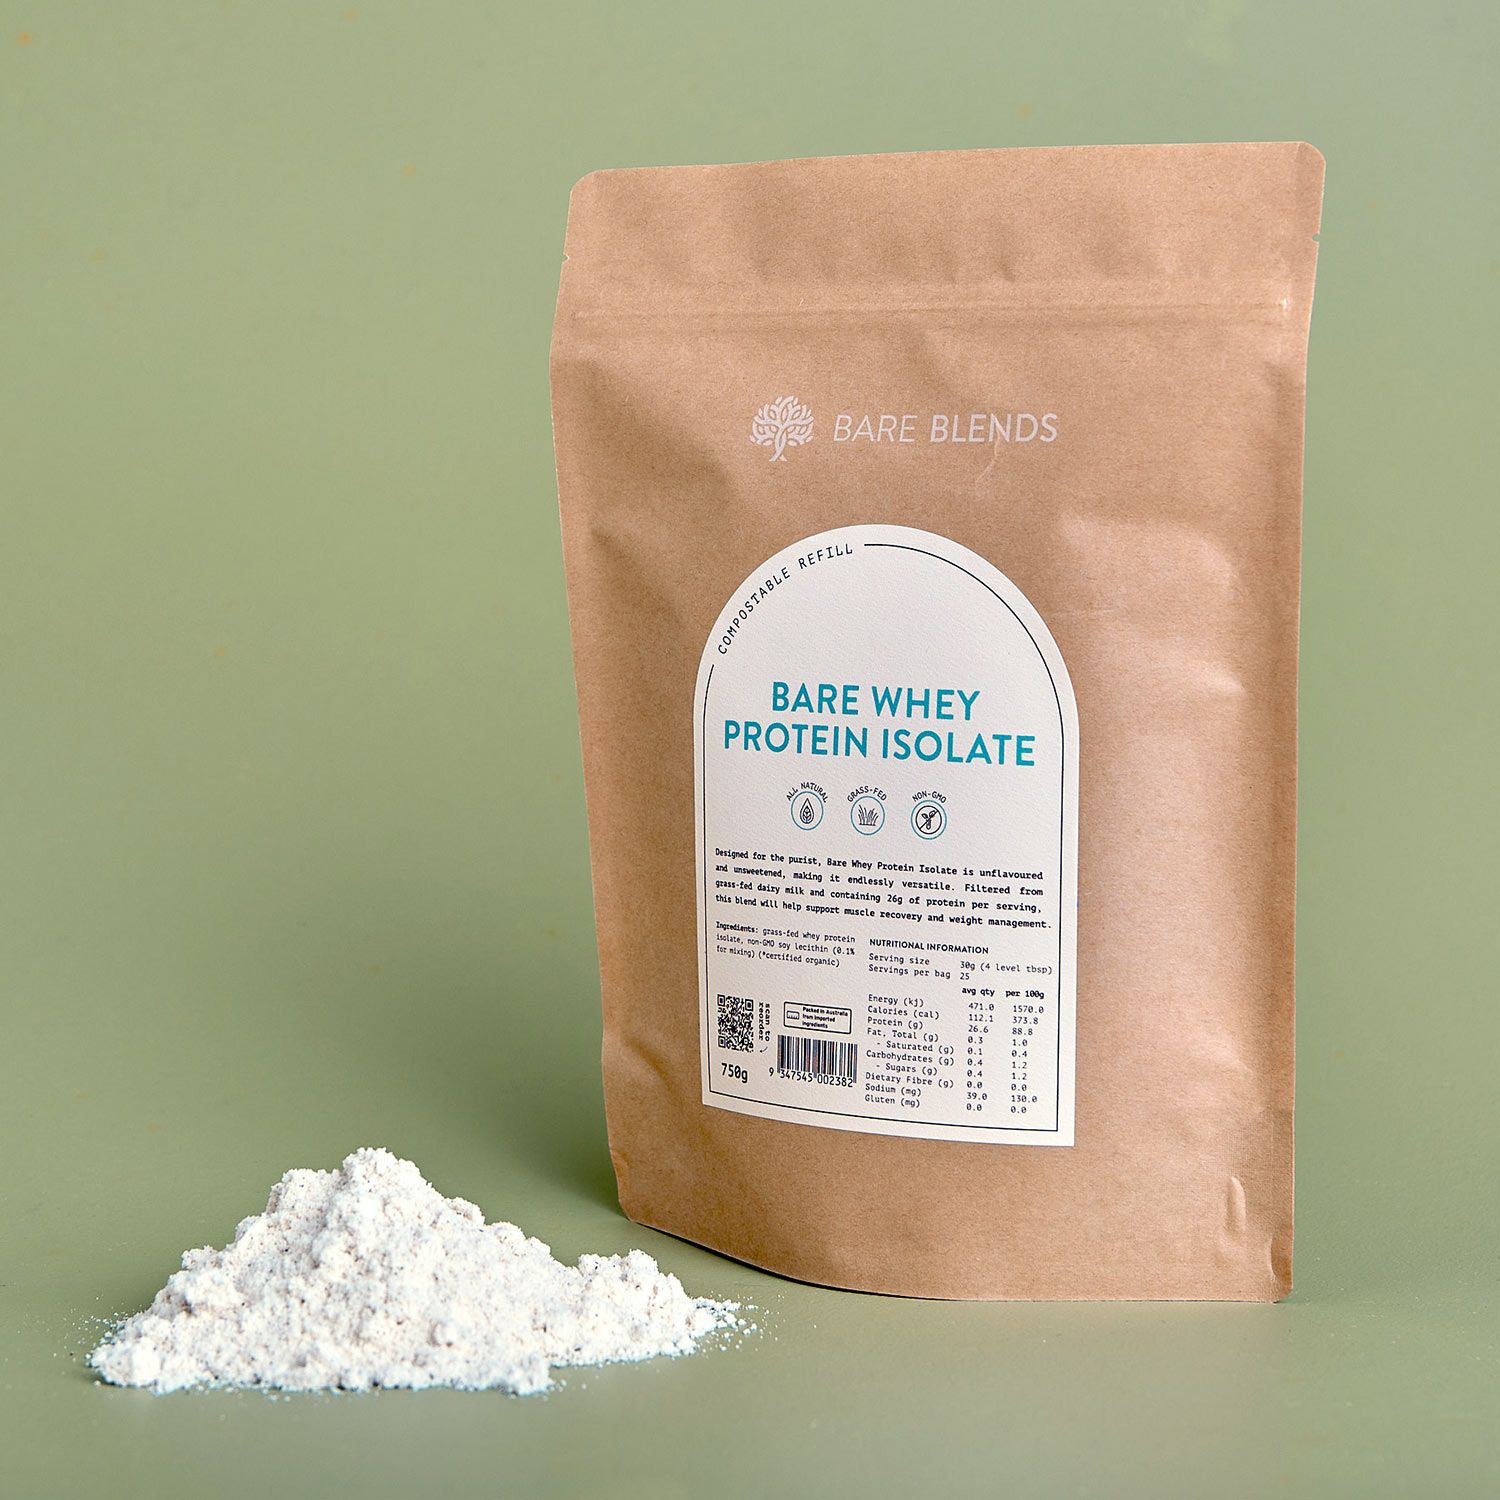 Bare Whey Protein Isolate powder